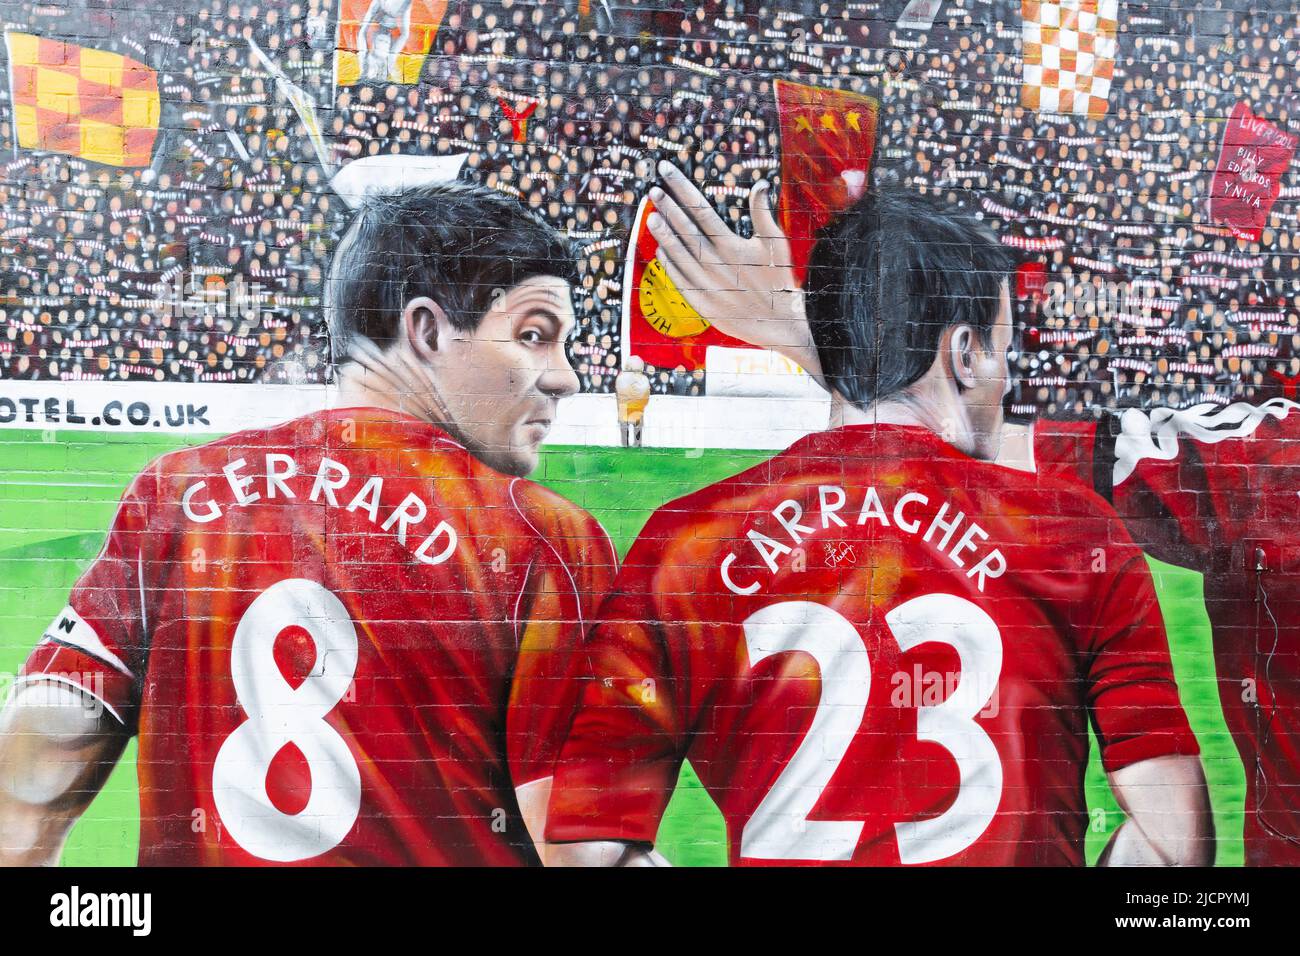 Liverpool FC mural featuring Steven Gerrard and Jamie Carragher, Anfield, Liverpool, England, UK Stock Photo